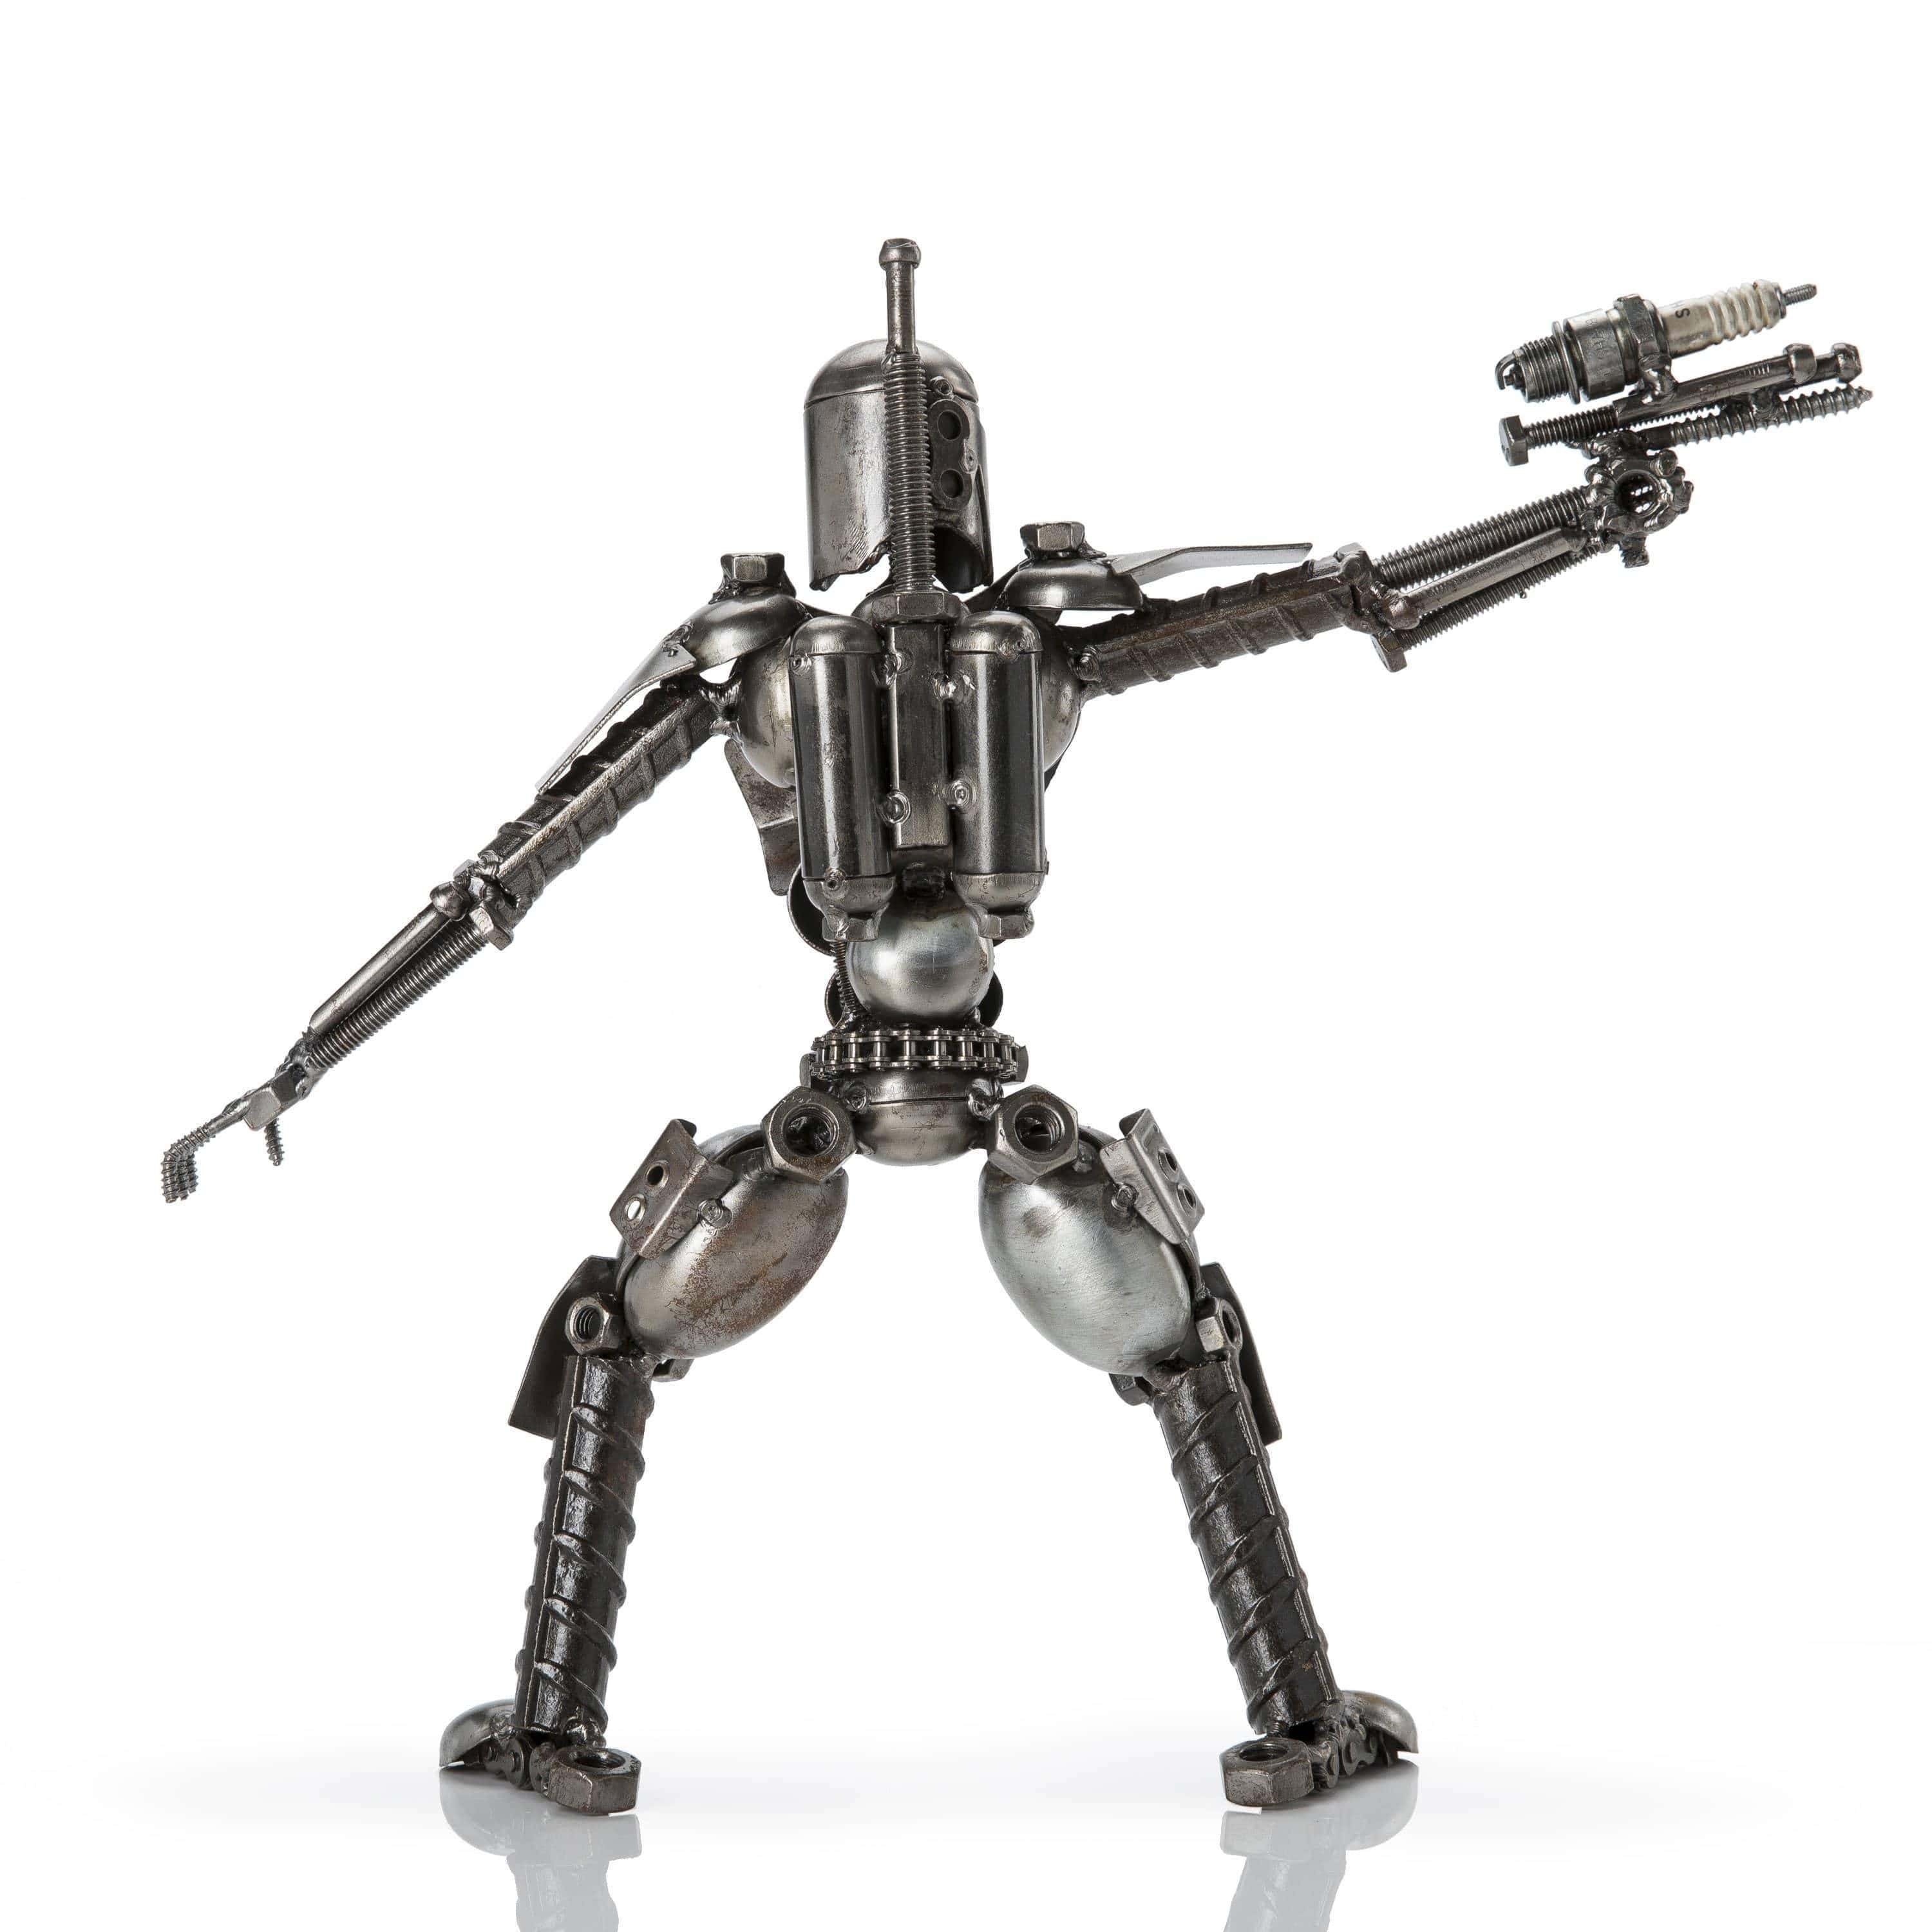 Kalifano Recycled Metal Art Jango Fett with Blaster Inspired Recycled Metal Sculpture RMS-700JFB-N